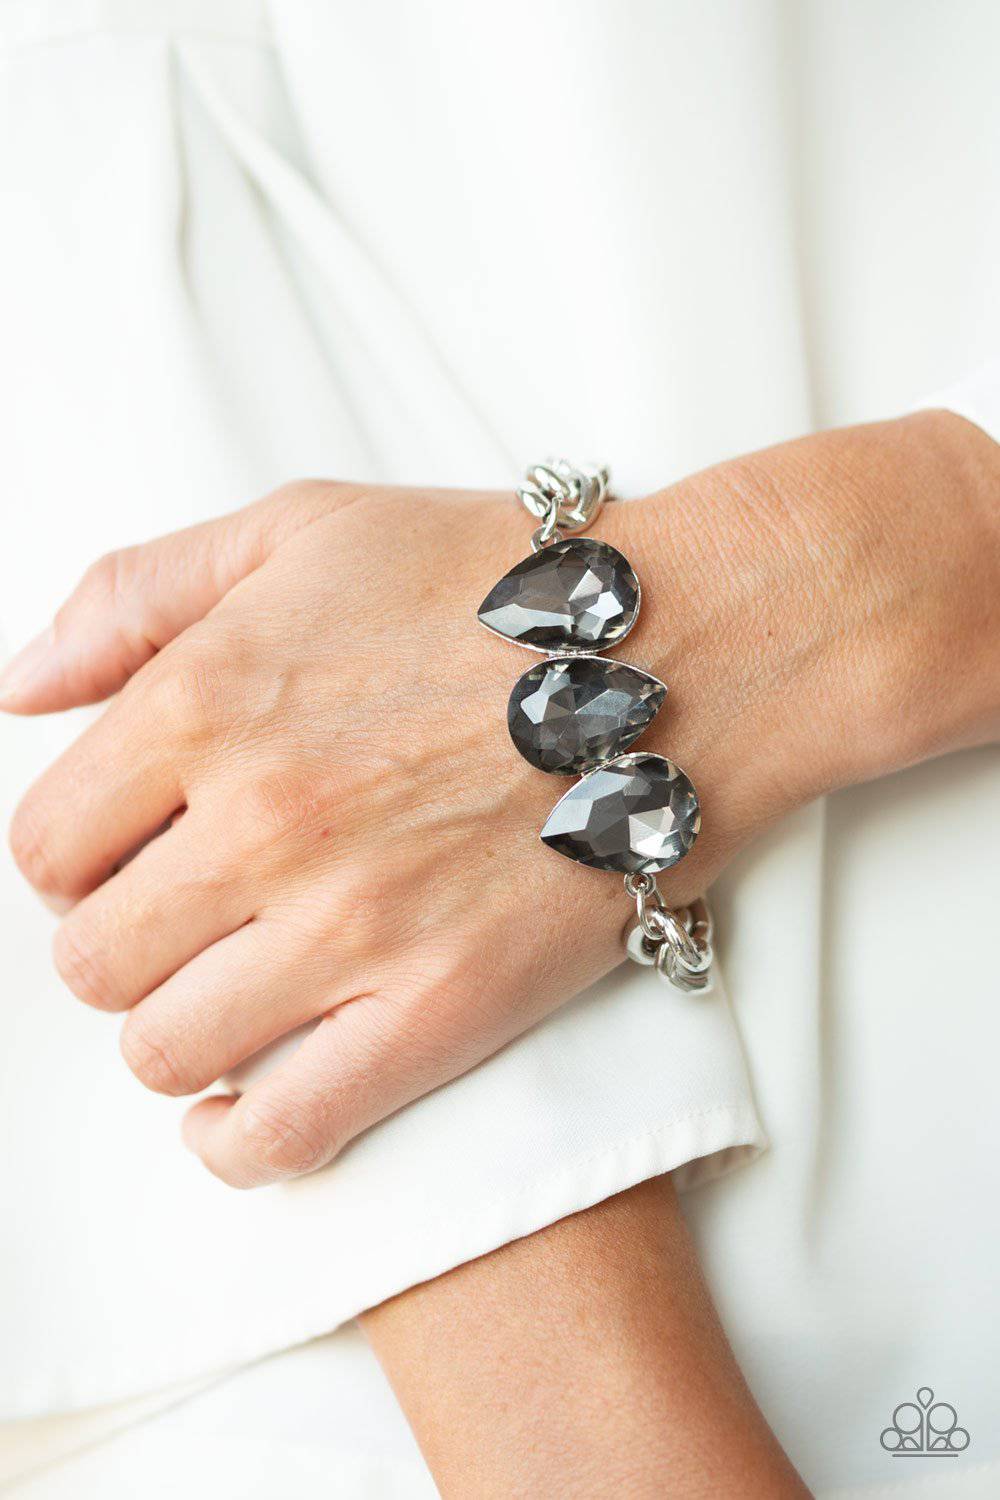 Bring Your Own Bling - Silver Bracelet - Paparazzi Accessories - GlaMarous Titi Jewels